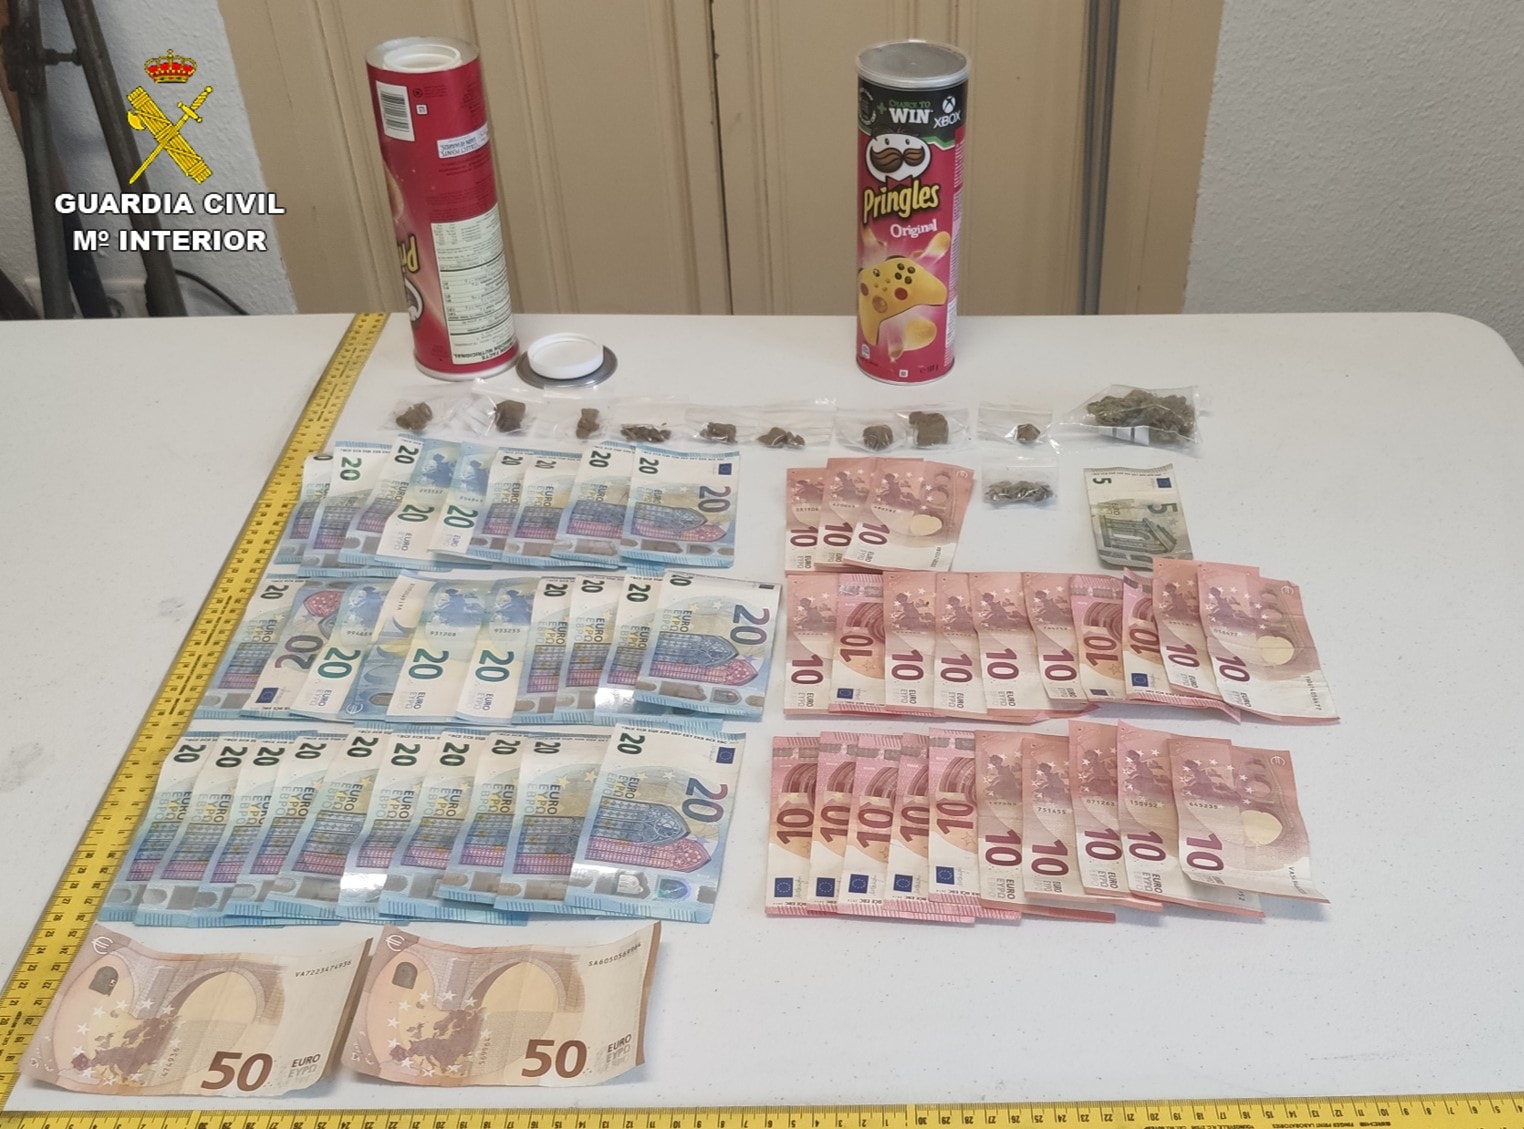 Pringles Tubes Hiding Drugs And Cash In False Bottoms Don't Fool Police On Spain's Costa Blanca